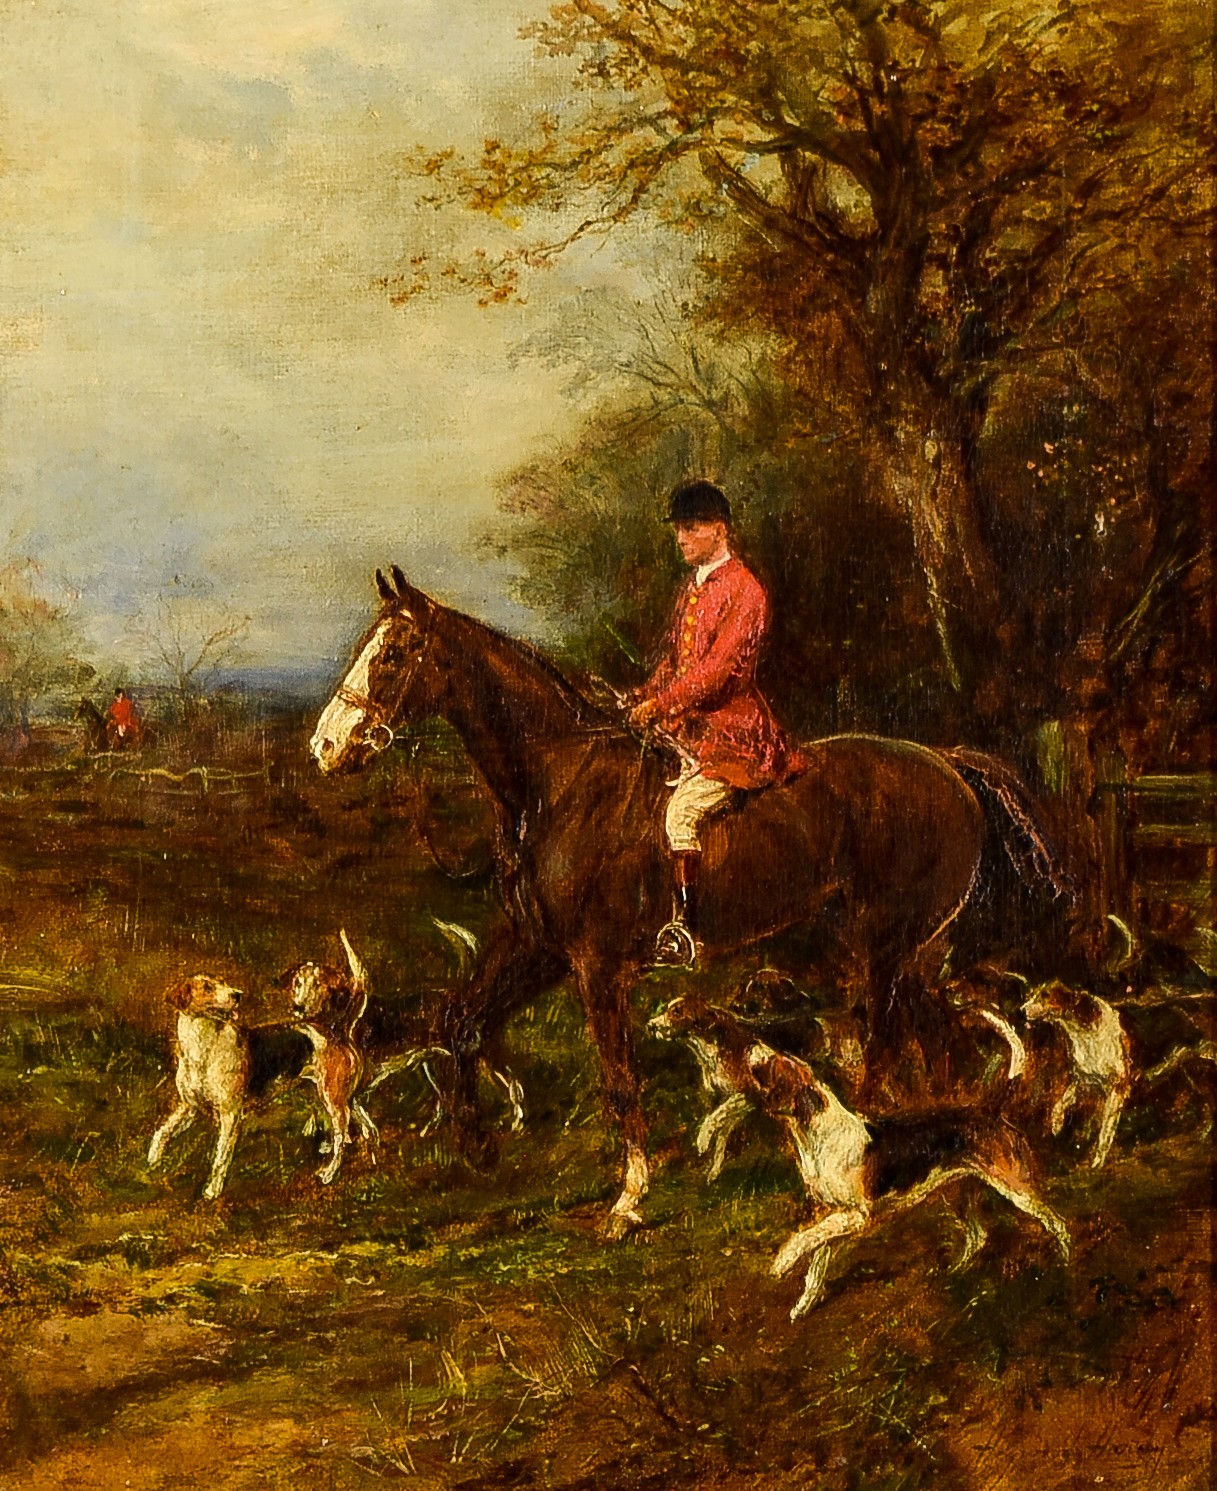 Heywood Hardy (1842-1933) - Oil painting - Huntsman and hounds, signed, canvas 12.25ins x 10.